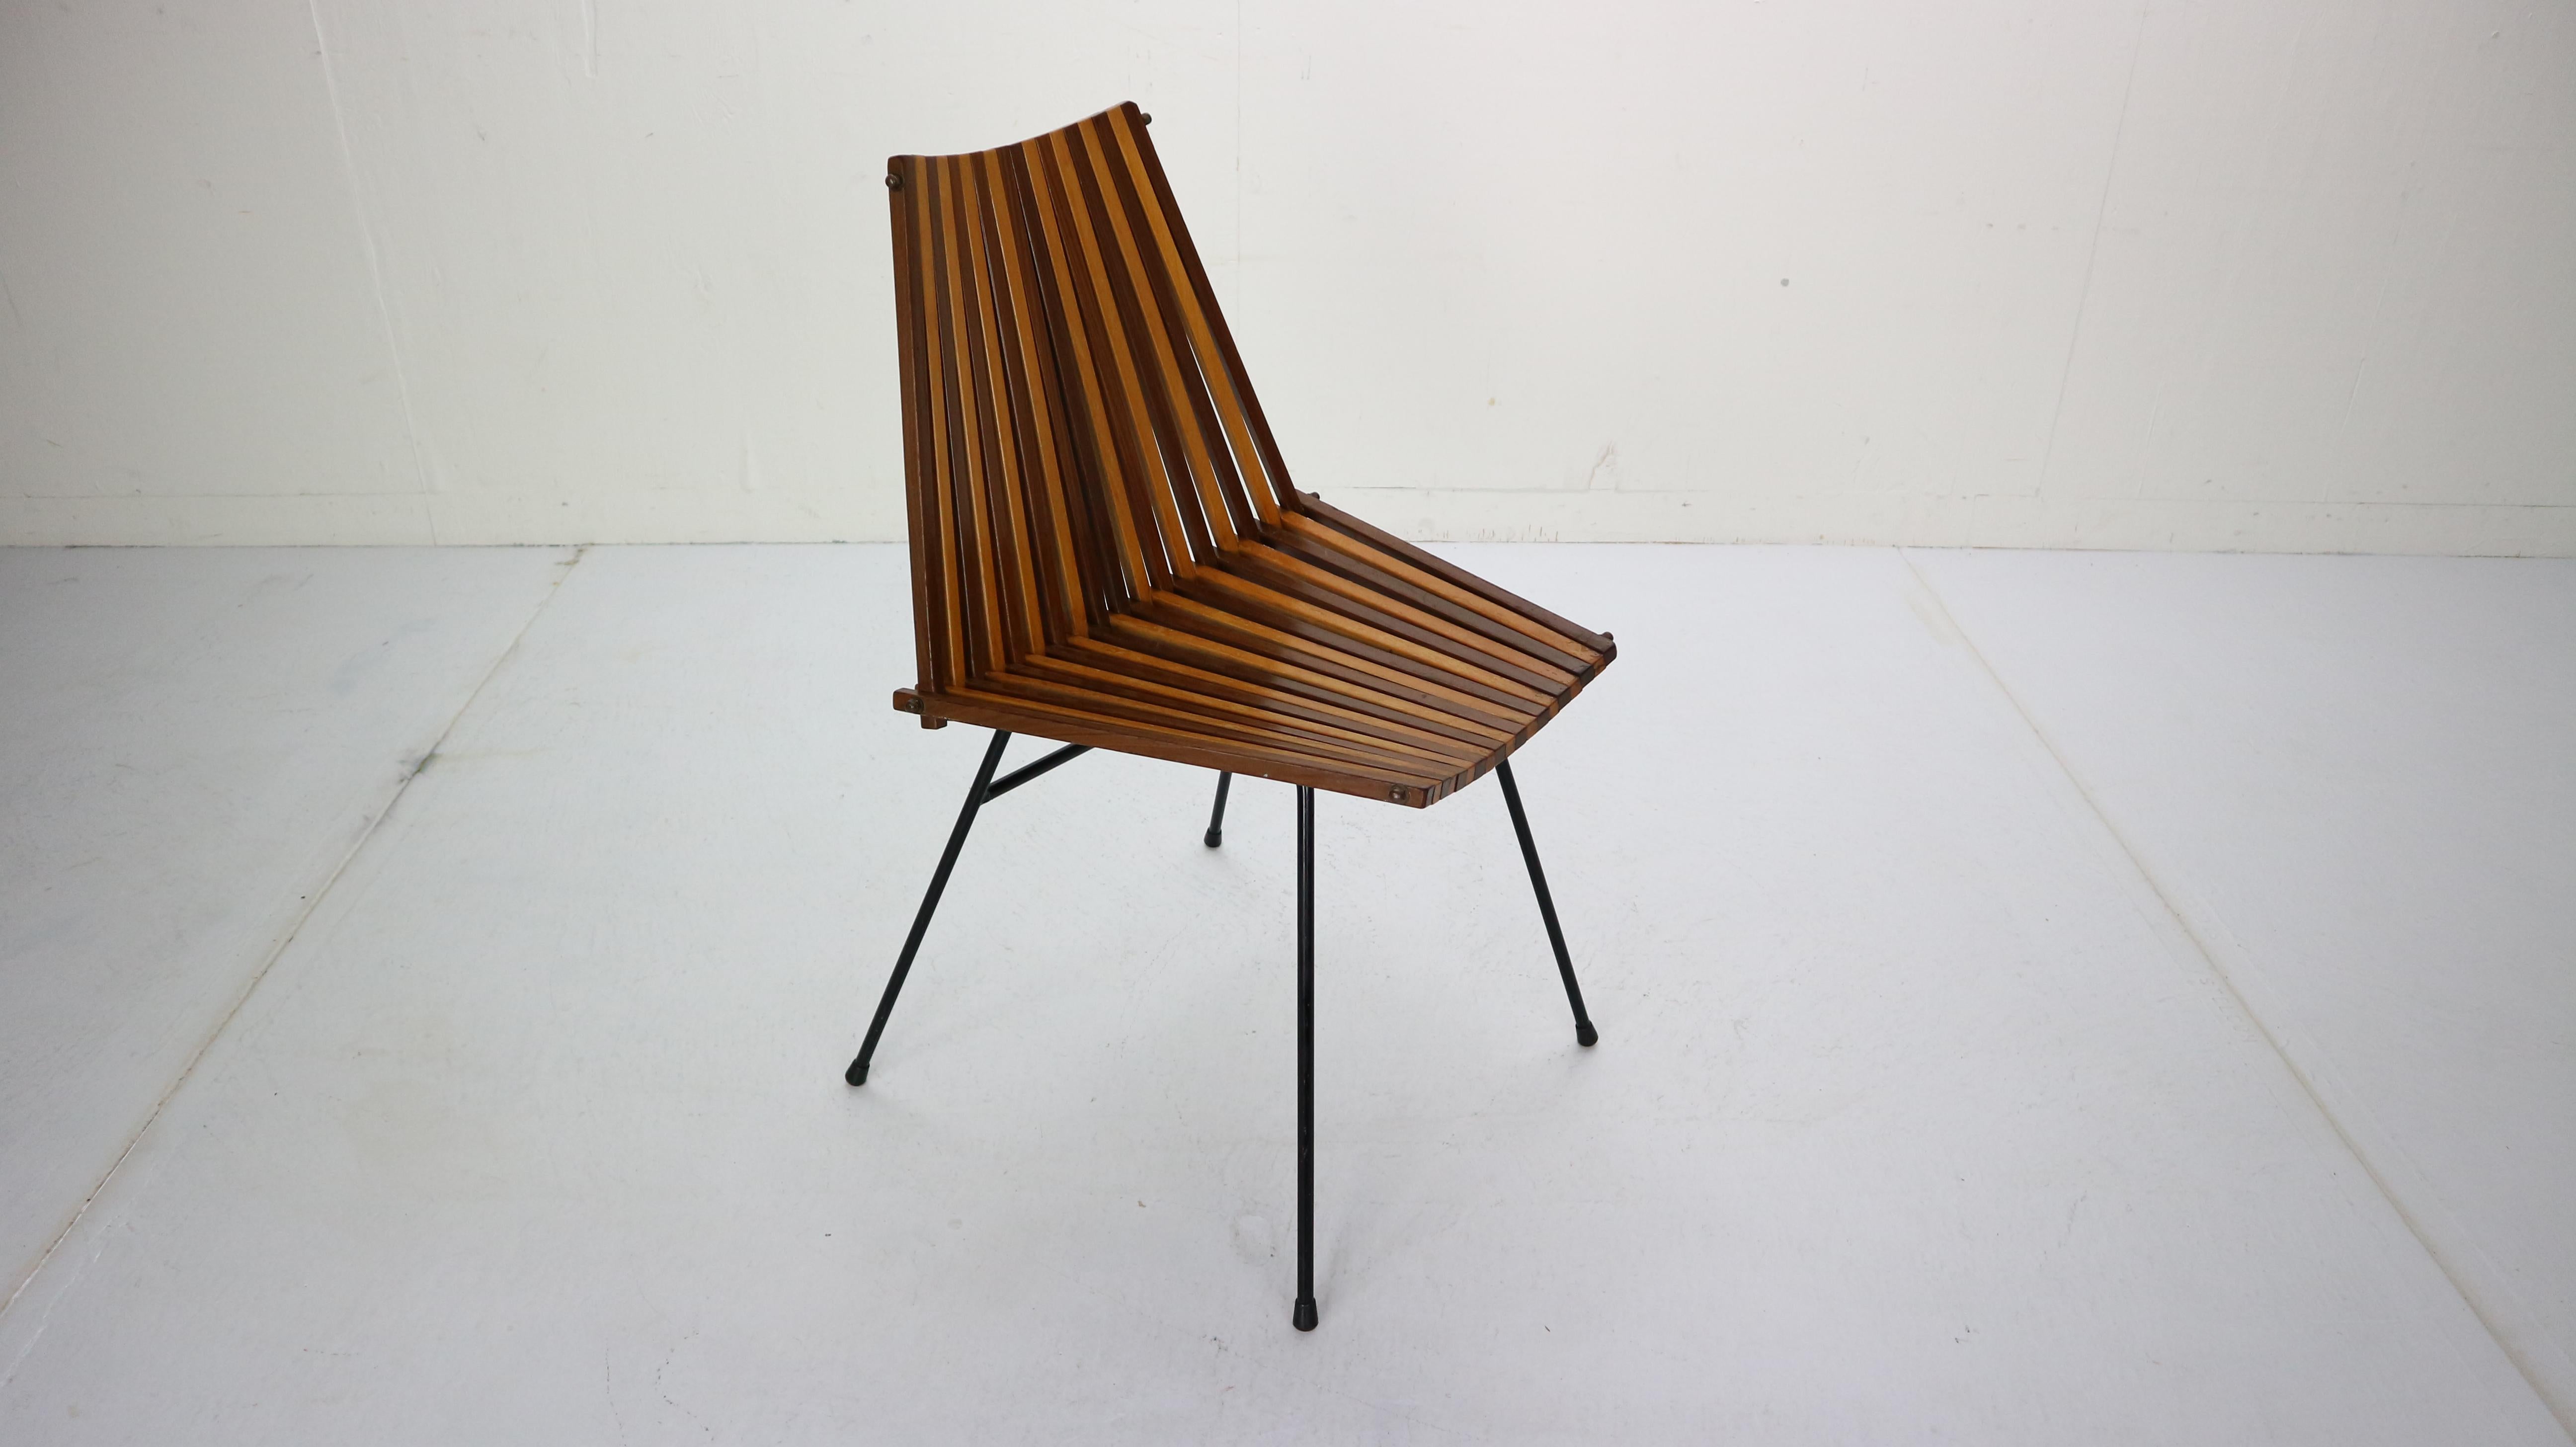 Elegant and special beautiful modernist chair, designed by Dirk van Sliedregt and made by Rohé Noordwolde in 1960s Netherlands.

This chair is made of steel rods with a back and seat, consists of 37 wooden slats in total. The slats are made of